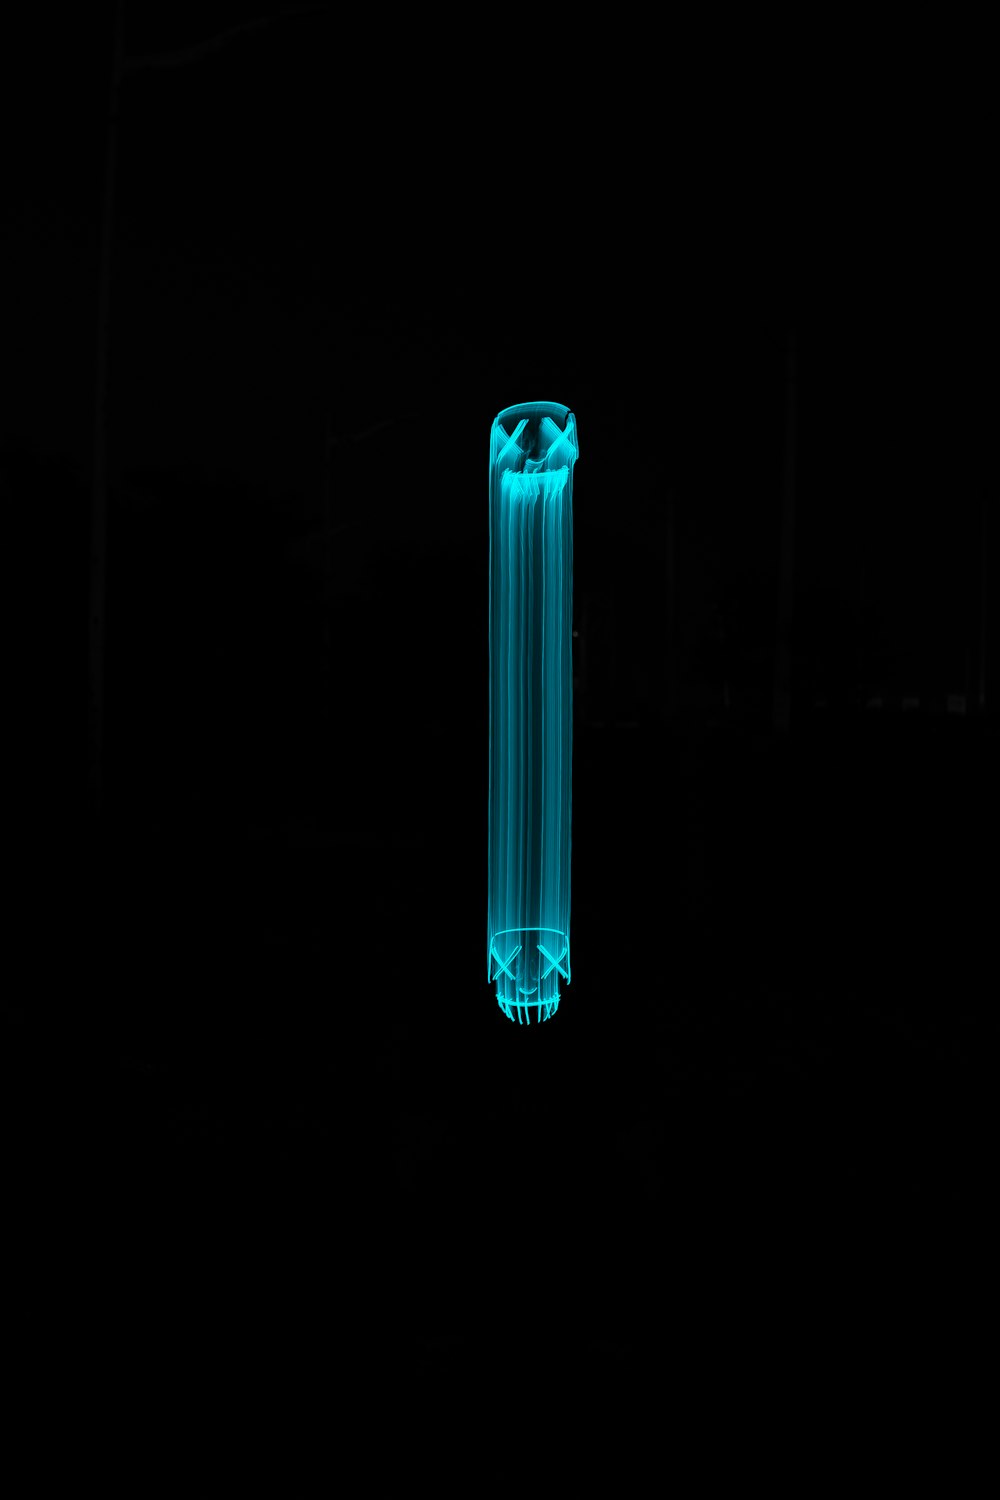 a blue tube is lit up in the dark